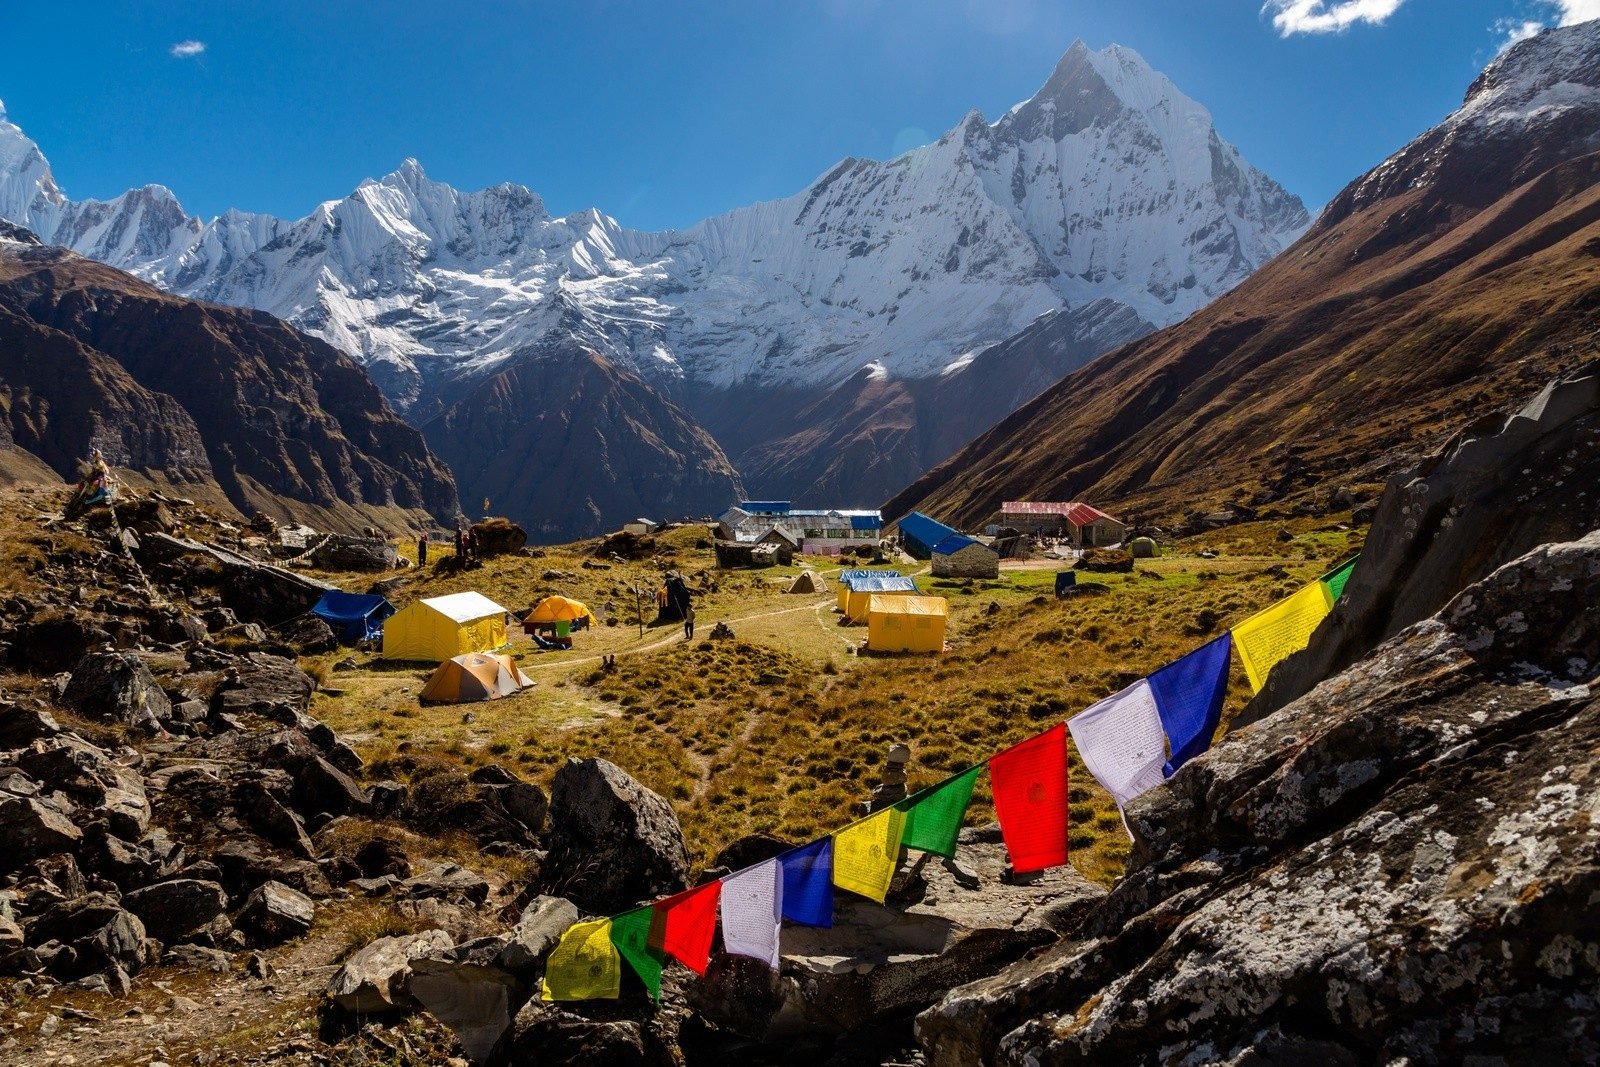 Explore the Cultural and Natural Wonders of Annapurna Region in Nepal